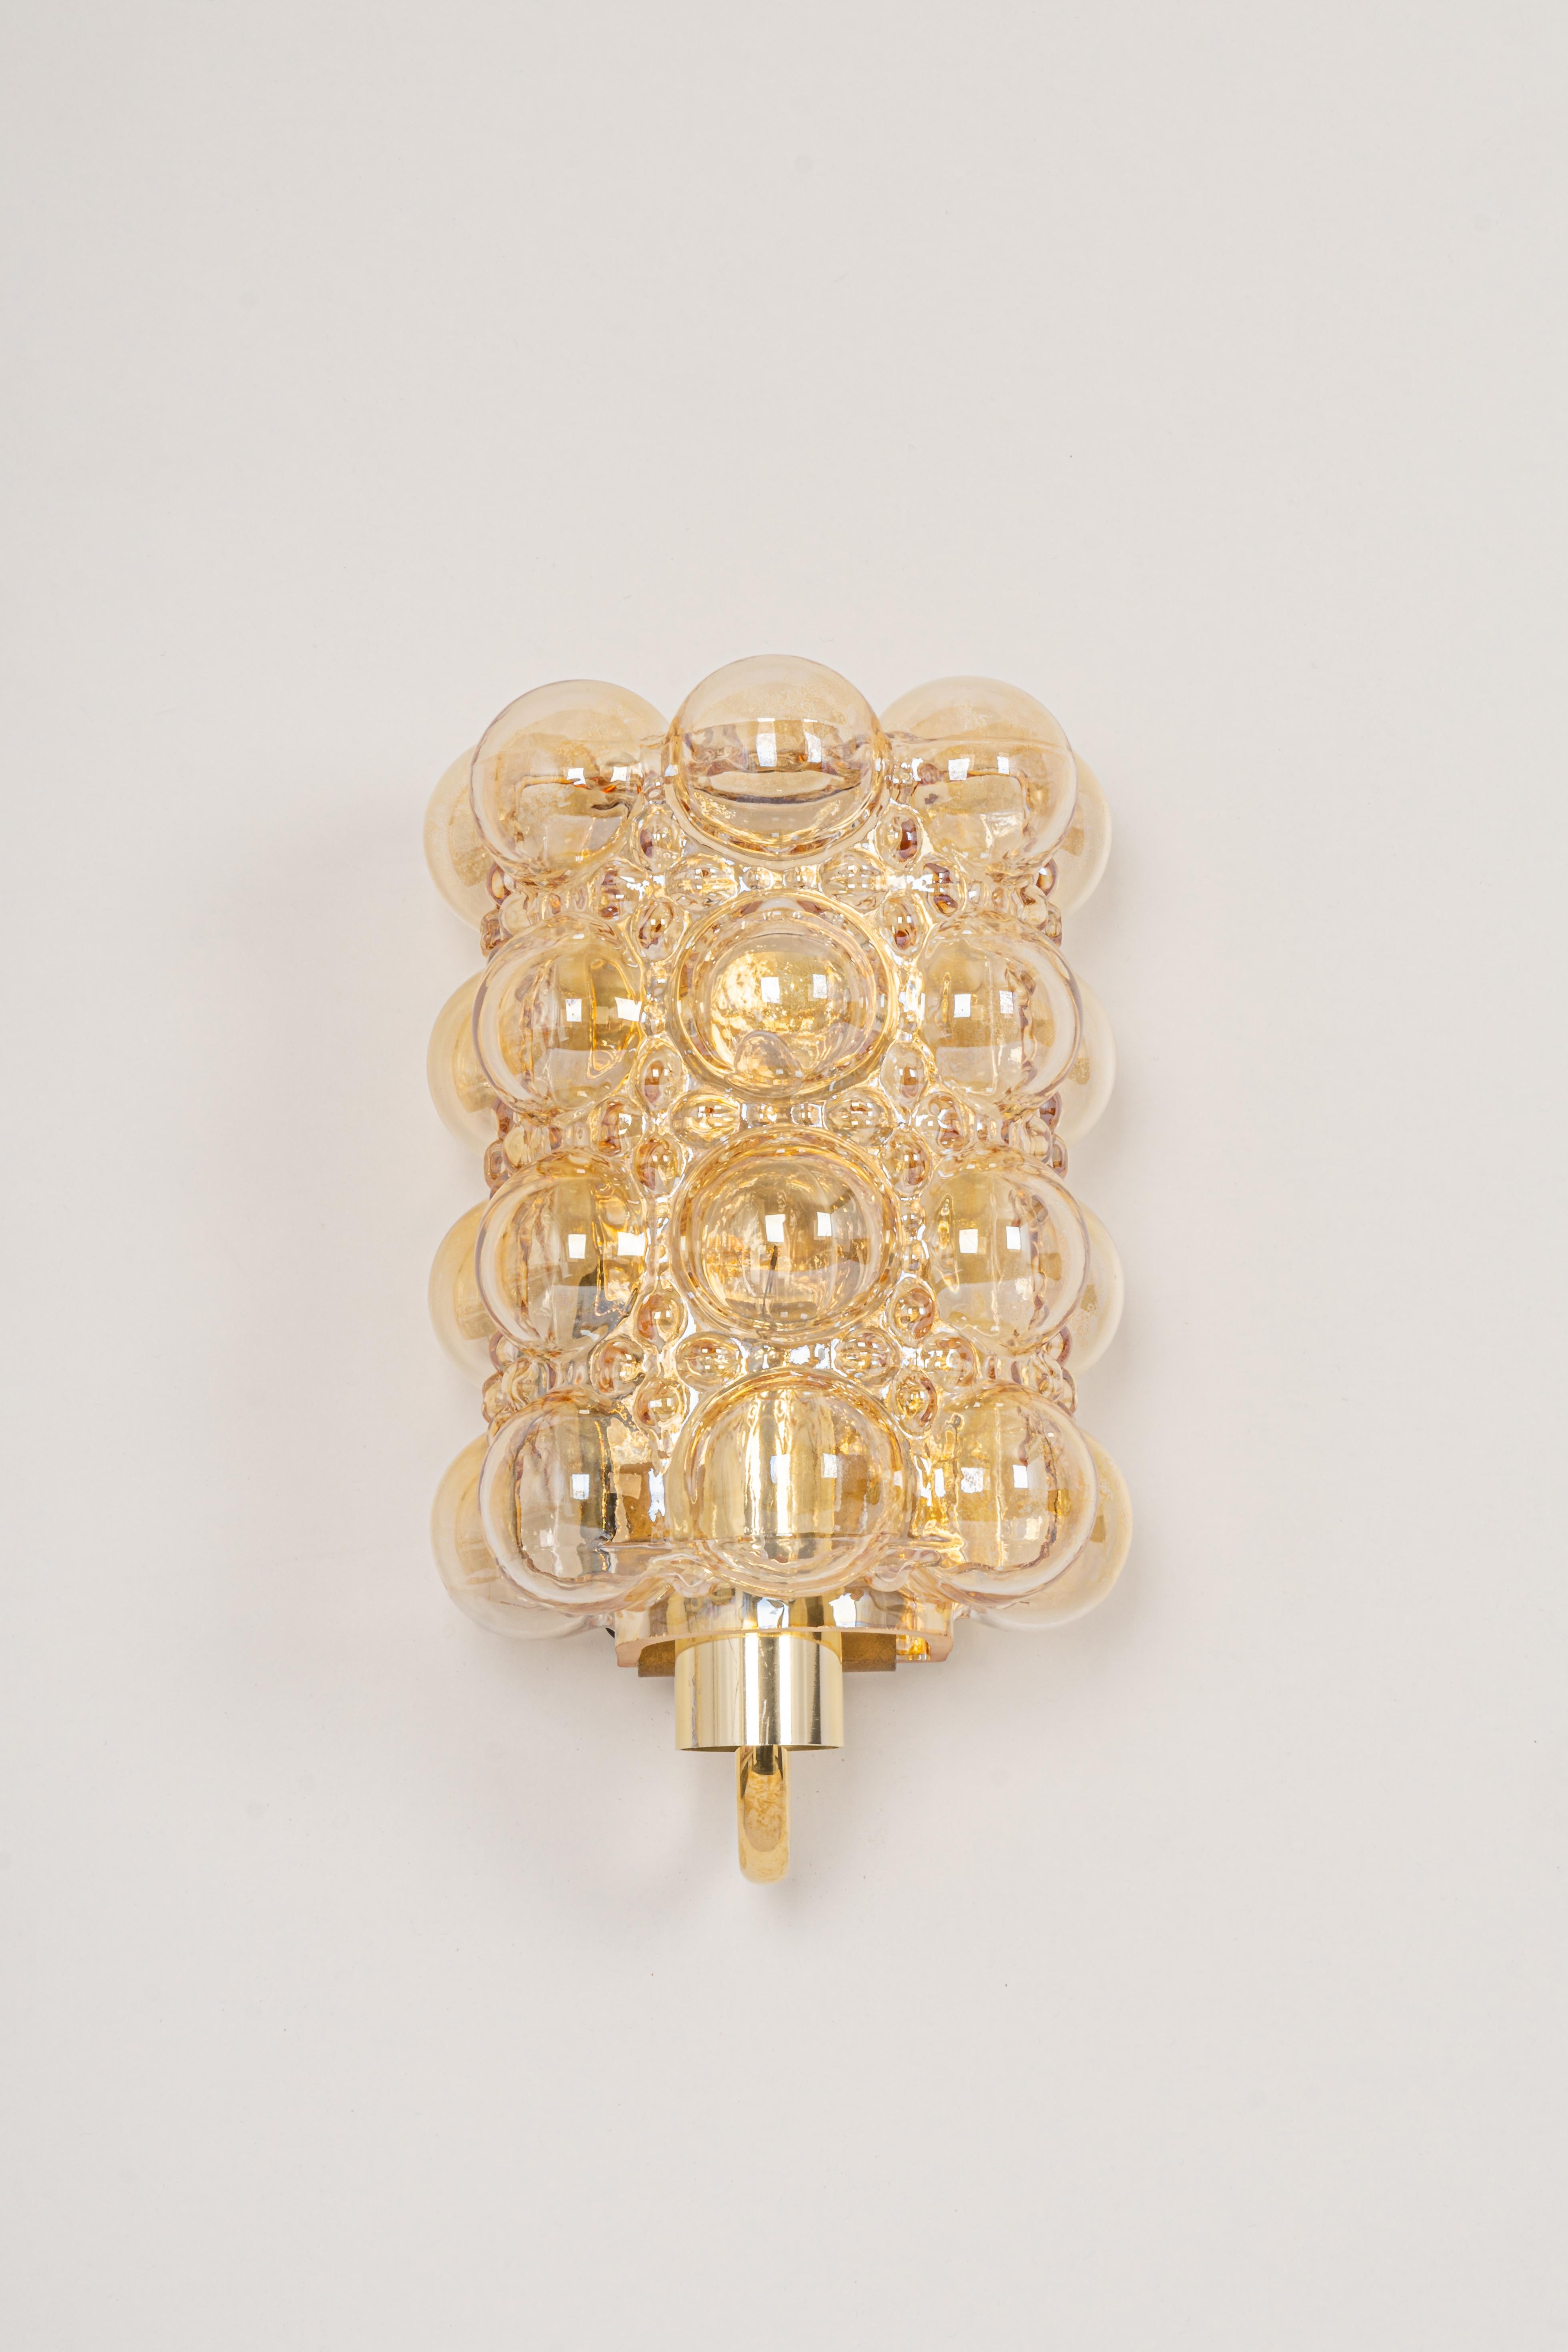 Wonderful golden wall lights, from Limburg Glashütte, Germany, circa 1960-1970. Smoked bubble glasses on a golden brass base.


Heavy quality and in very good condition. Cleaned, well-wired and ready to use.
For each sconce: 1 x E27 Standard